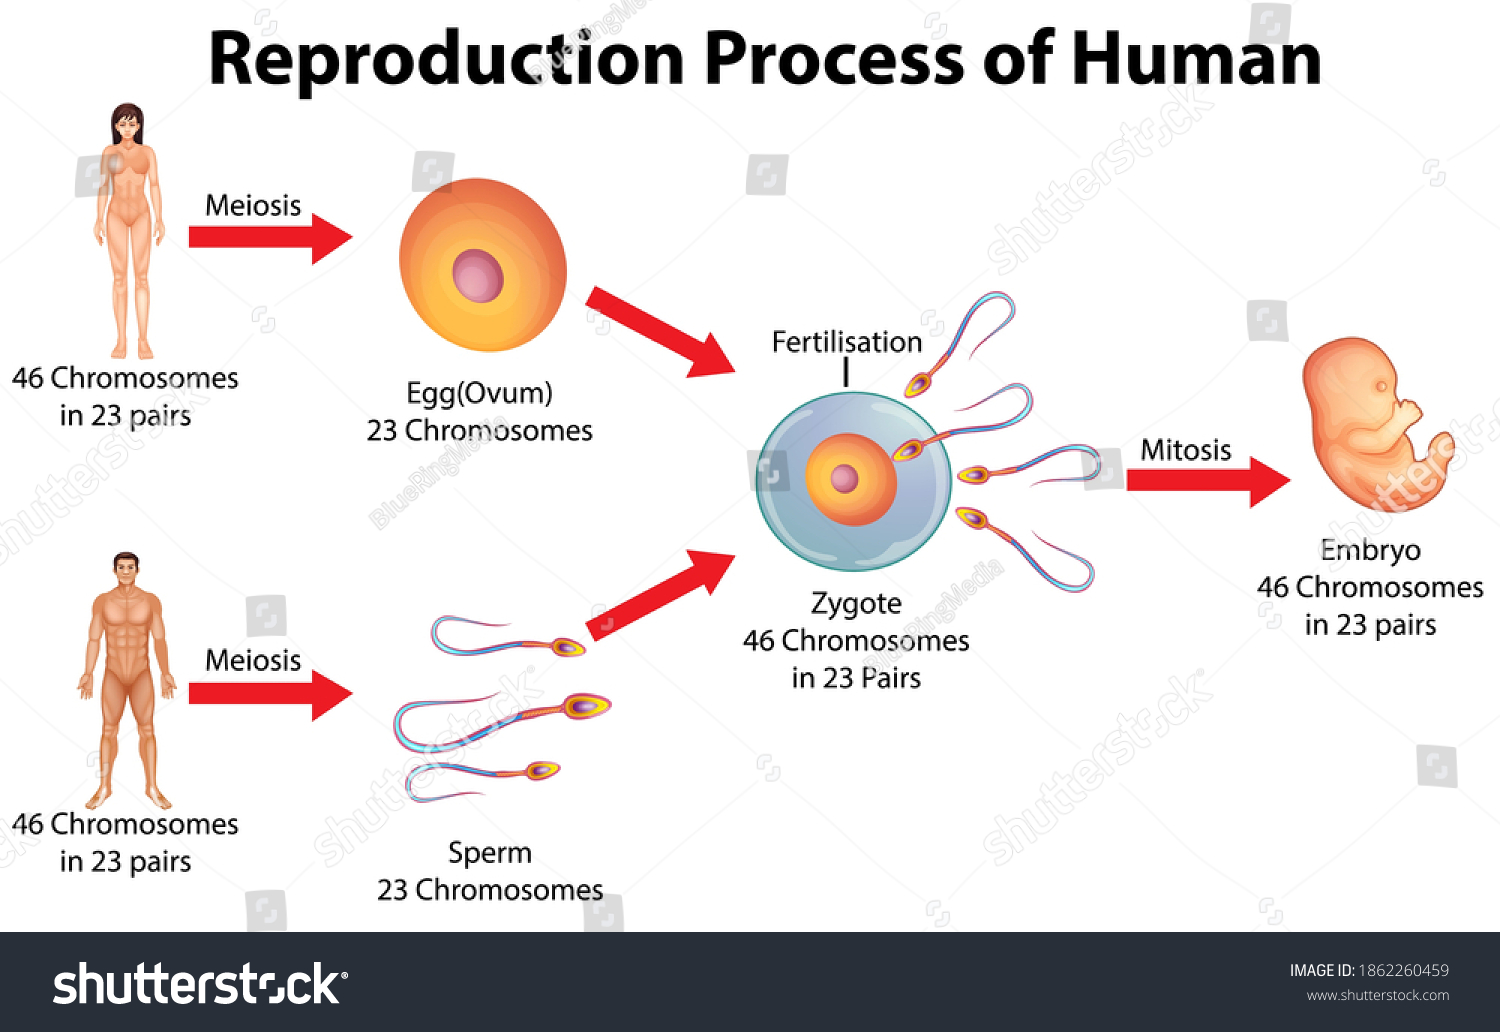 Reproduction Process Human Illustration Stock Vector Royalty Free 1862260459 Shutterstock 